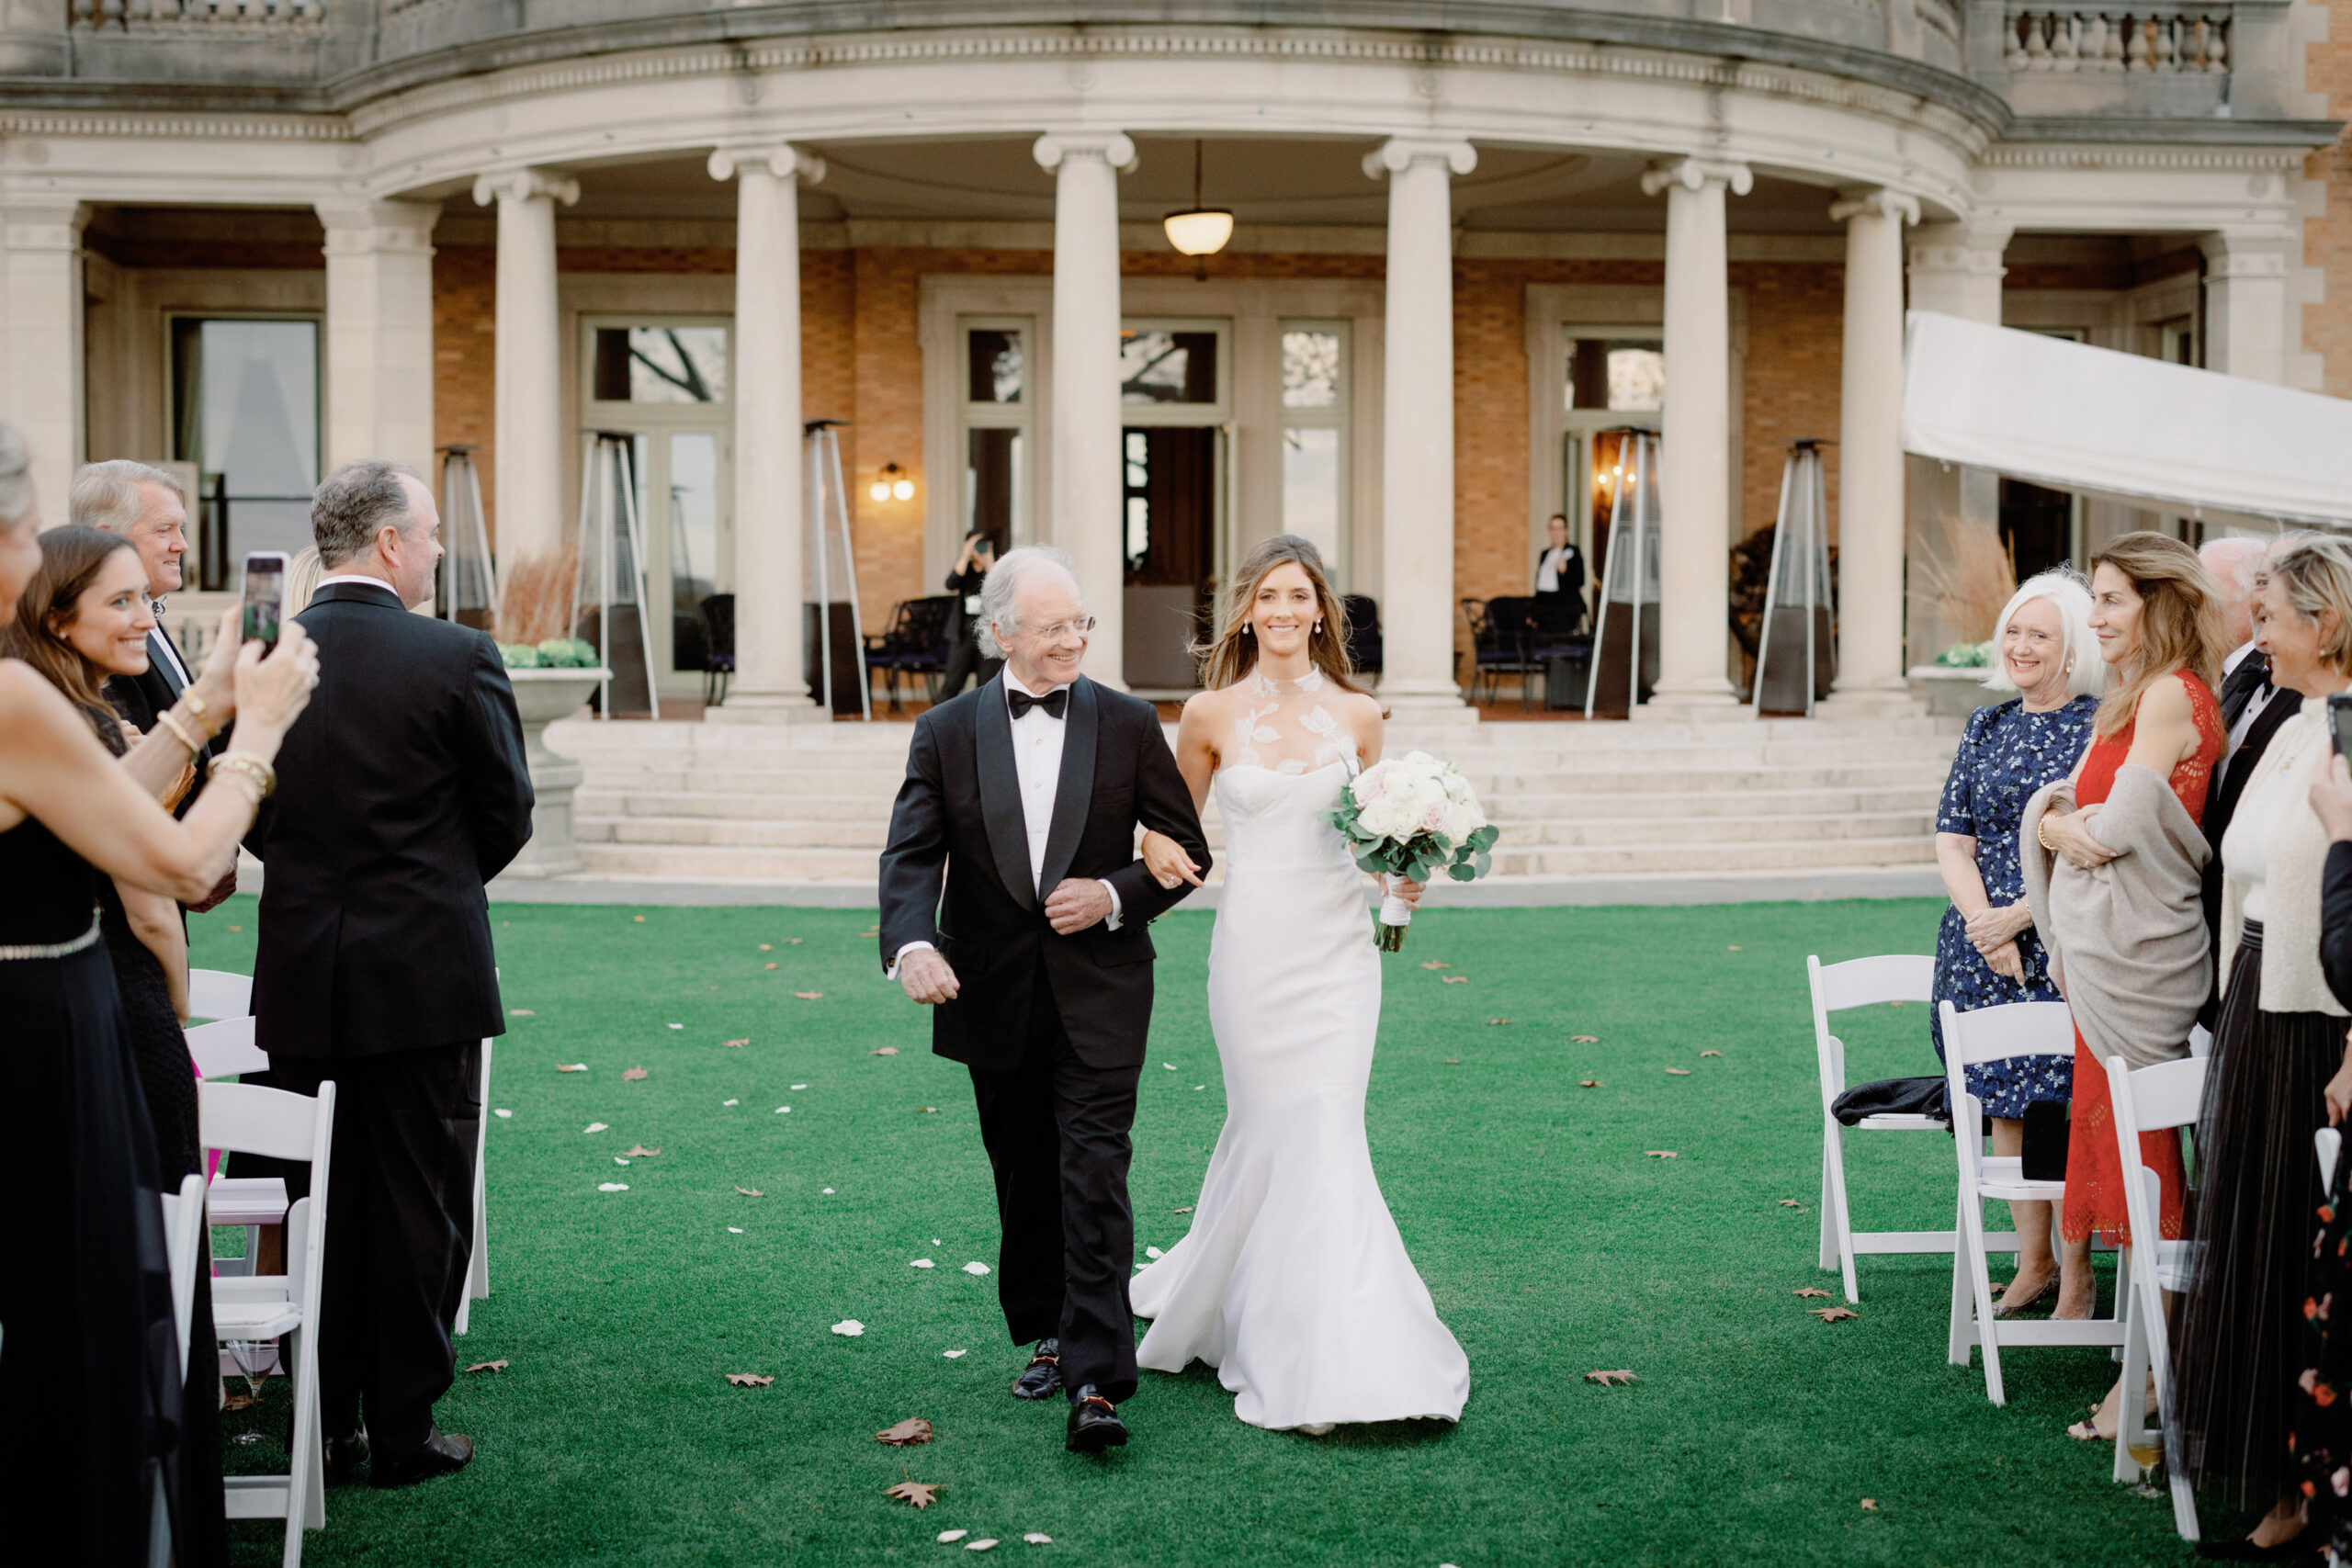 Editorial image of the bride walking down the aisle with her father at Sleepy Hollow Country Club, NY. Image by Jenny Fu Studio